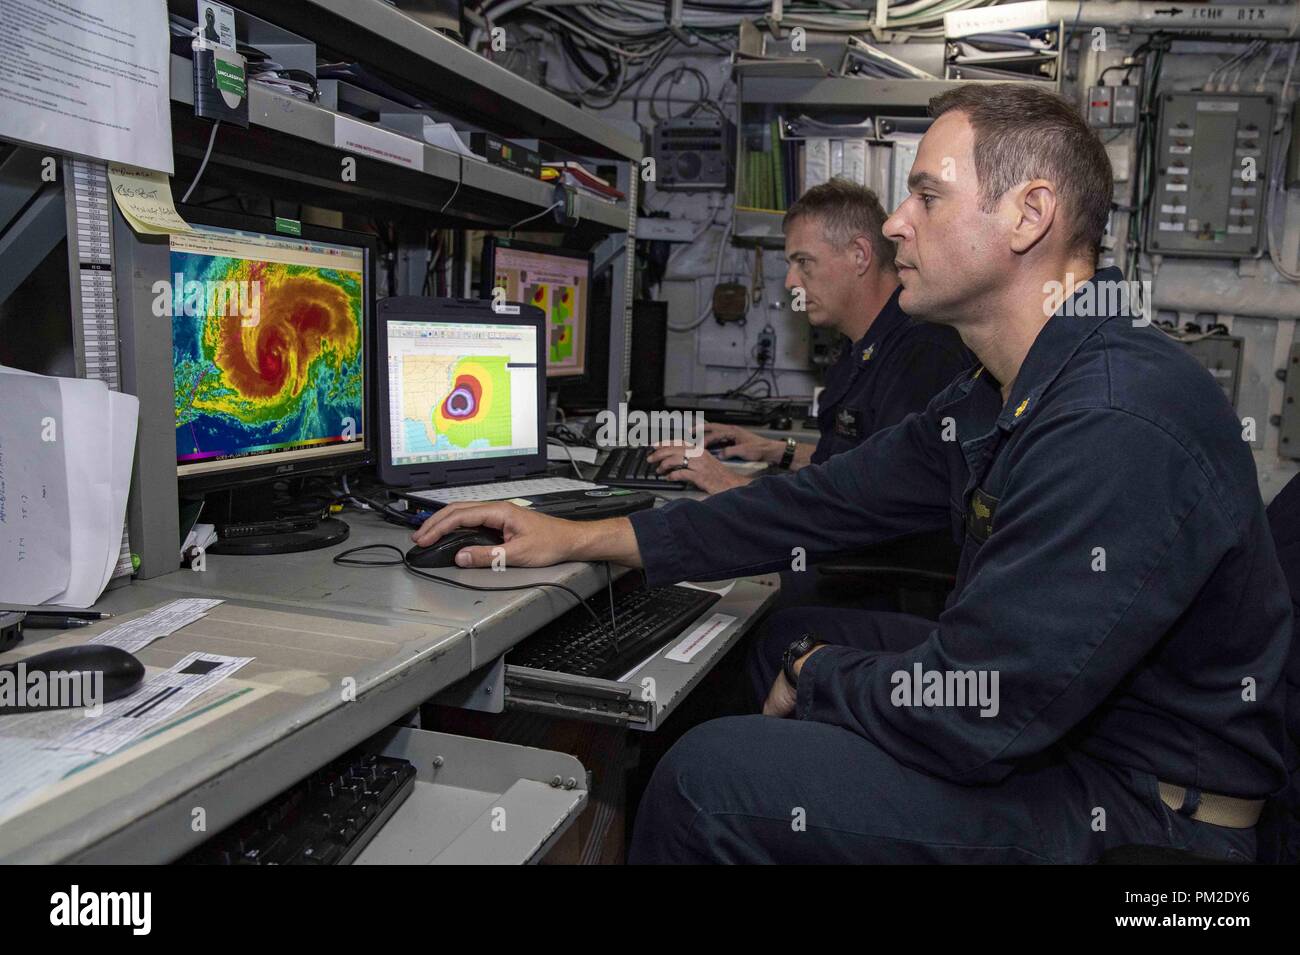 Atlantic Ocean. 13th Sep, 2018. ATLANTIC OCEAN (Sept. 13, 2018) Lt. Cmdr. Chad Geis, right, meteorological and ceanographic officer, and Aerographer's Mate 1st Class Russell Ligon analyze Hurricane Florence in the meteorological room aboard the Wasp-class amphibious assault ship USS Kearsarge (LHD 3). U.S. Naval Forces Northern Command deployed Kearsarge, along with embarked elements of the 22nd Marine Expeditionary Unit and the Expeditionary Strike Group 2 command element, to be positioned to provide Defense Support to Civil Authorities from the sea in response to Hurricane Florence, sh Stock Photo